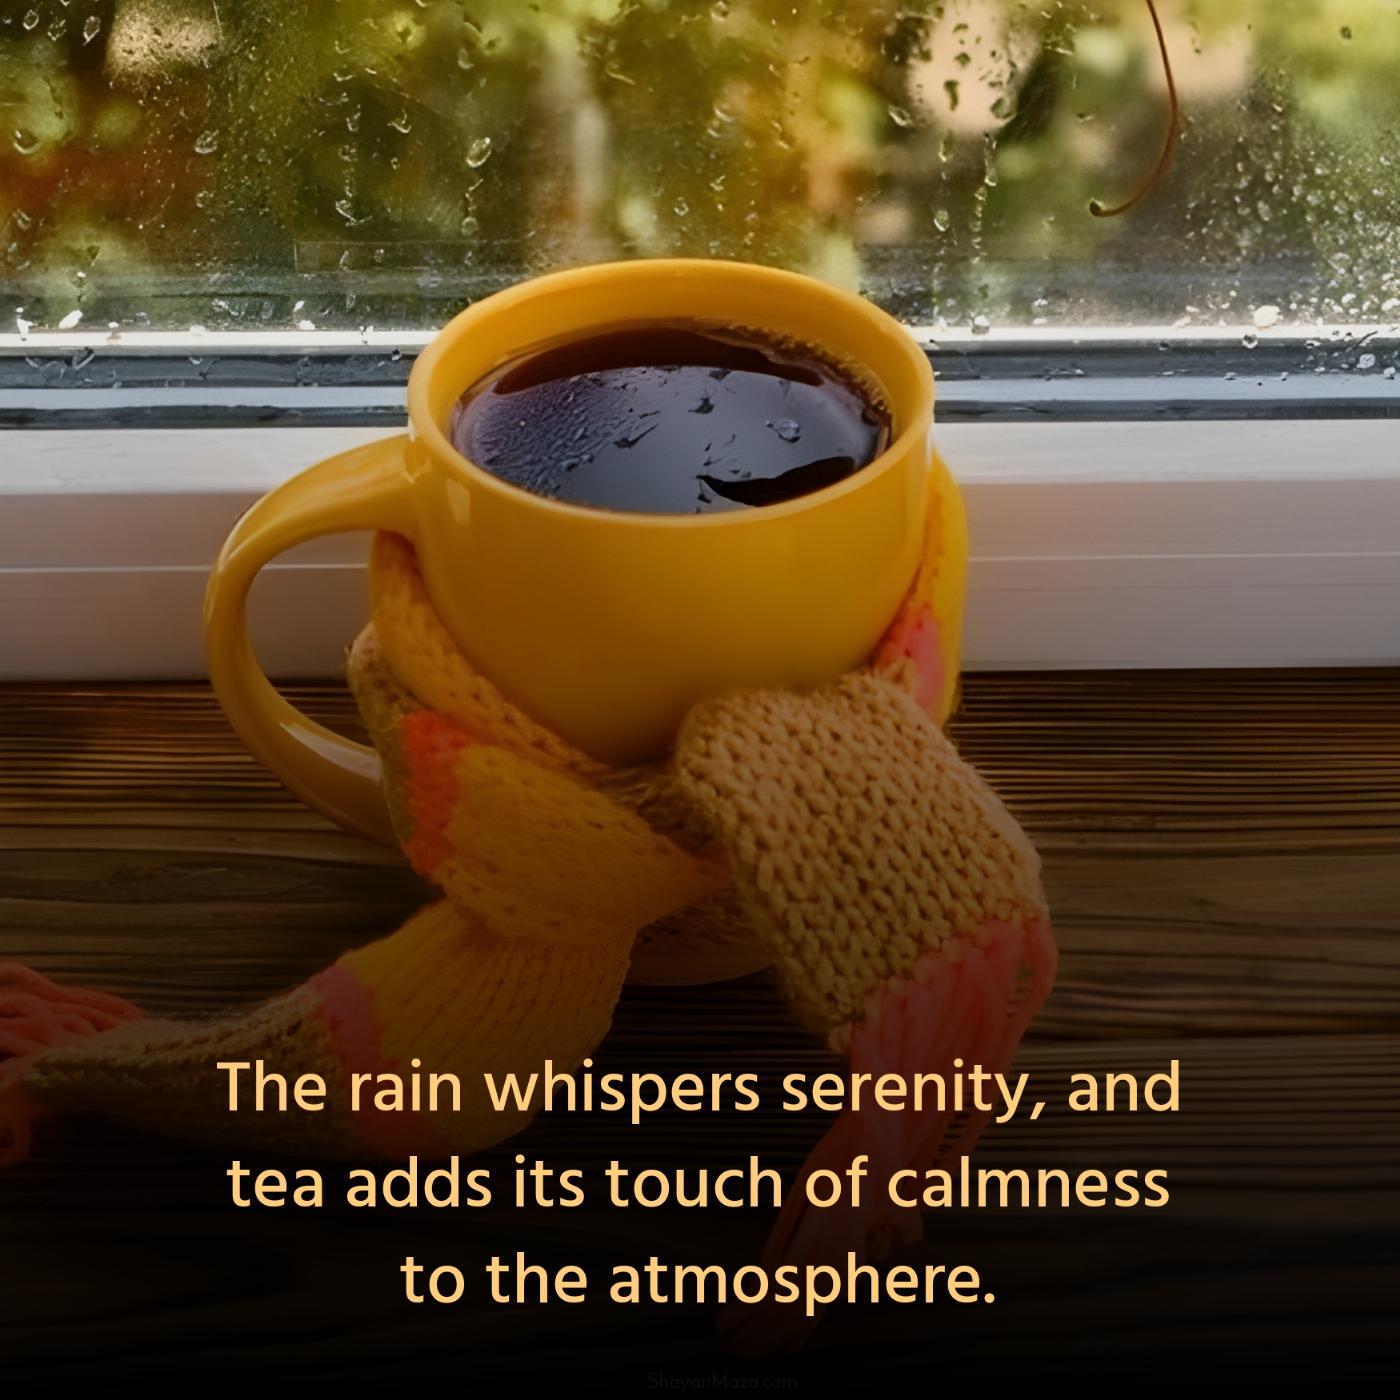 The rain whispers serenity and tea adds its touch of calmness